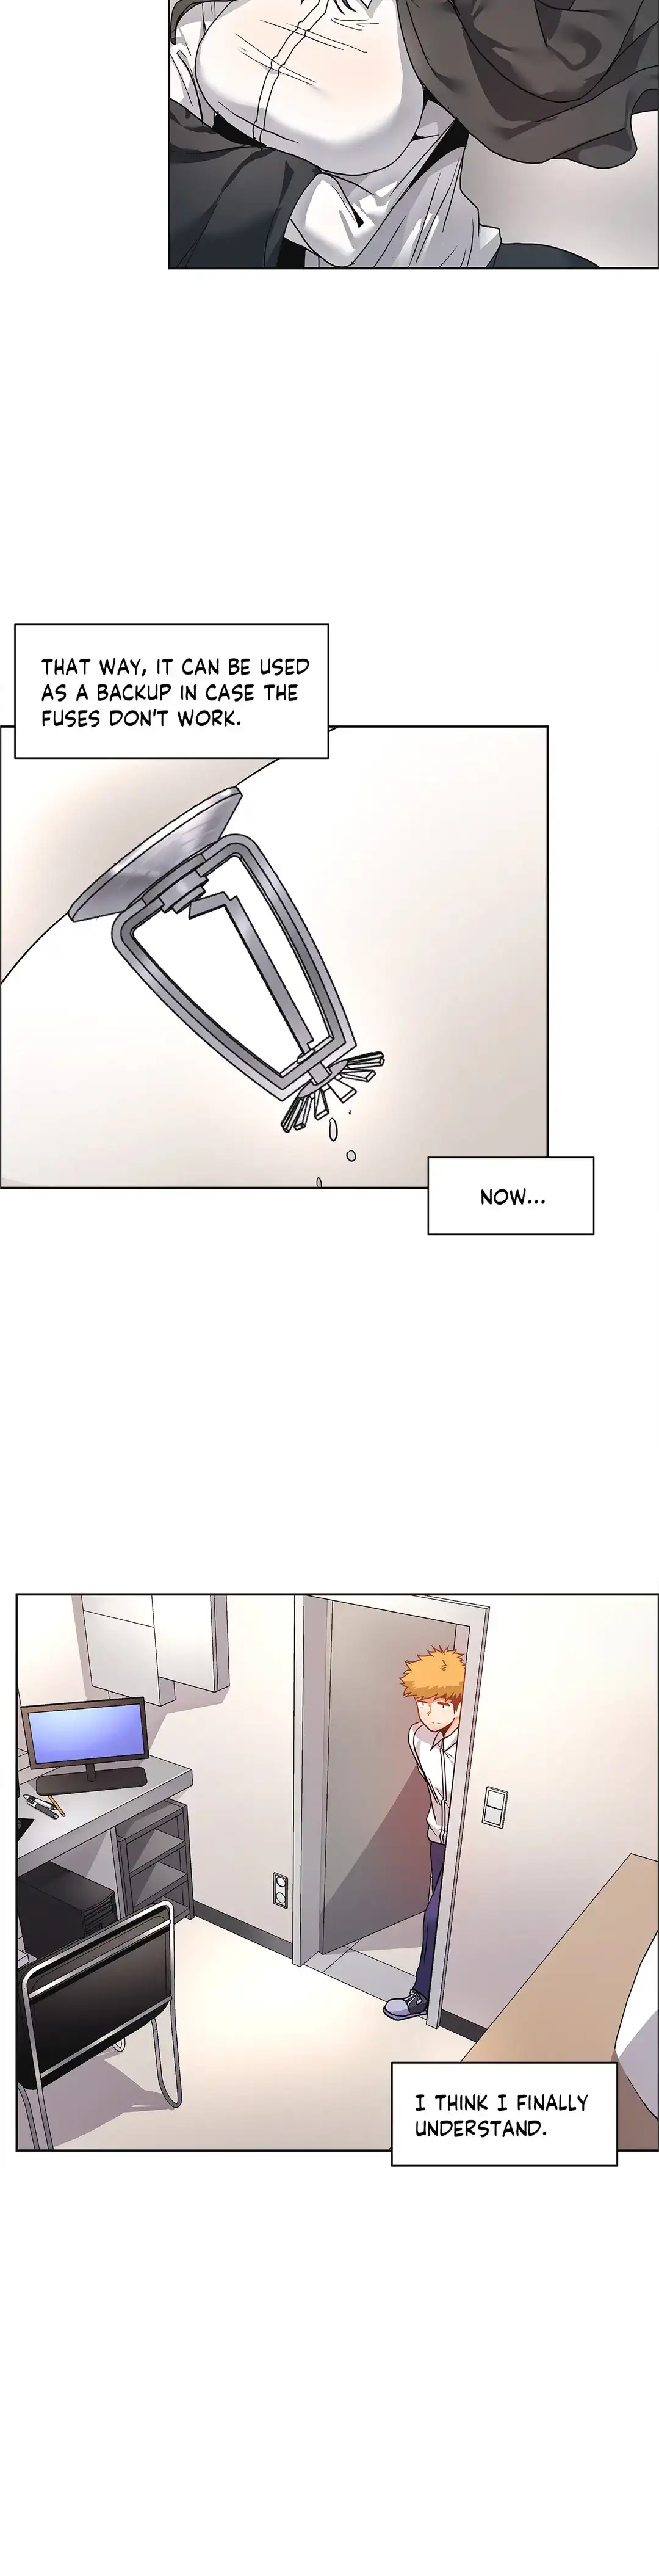 The Girl That Wet the Wall - Chapter 37 Page 17